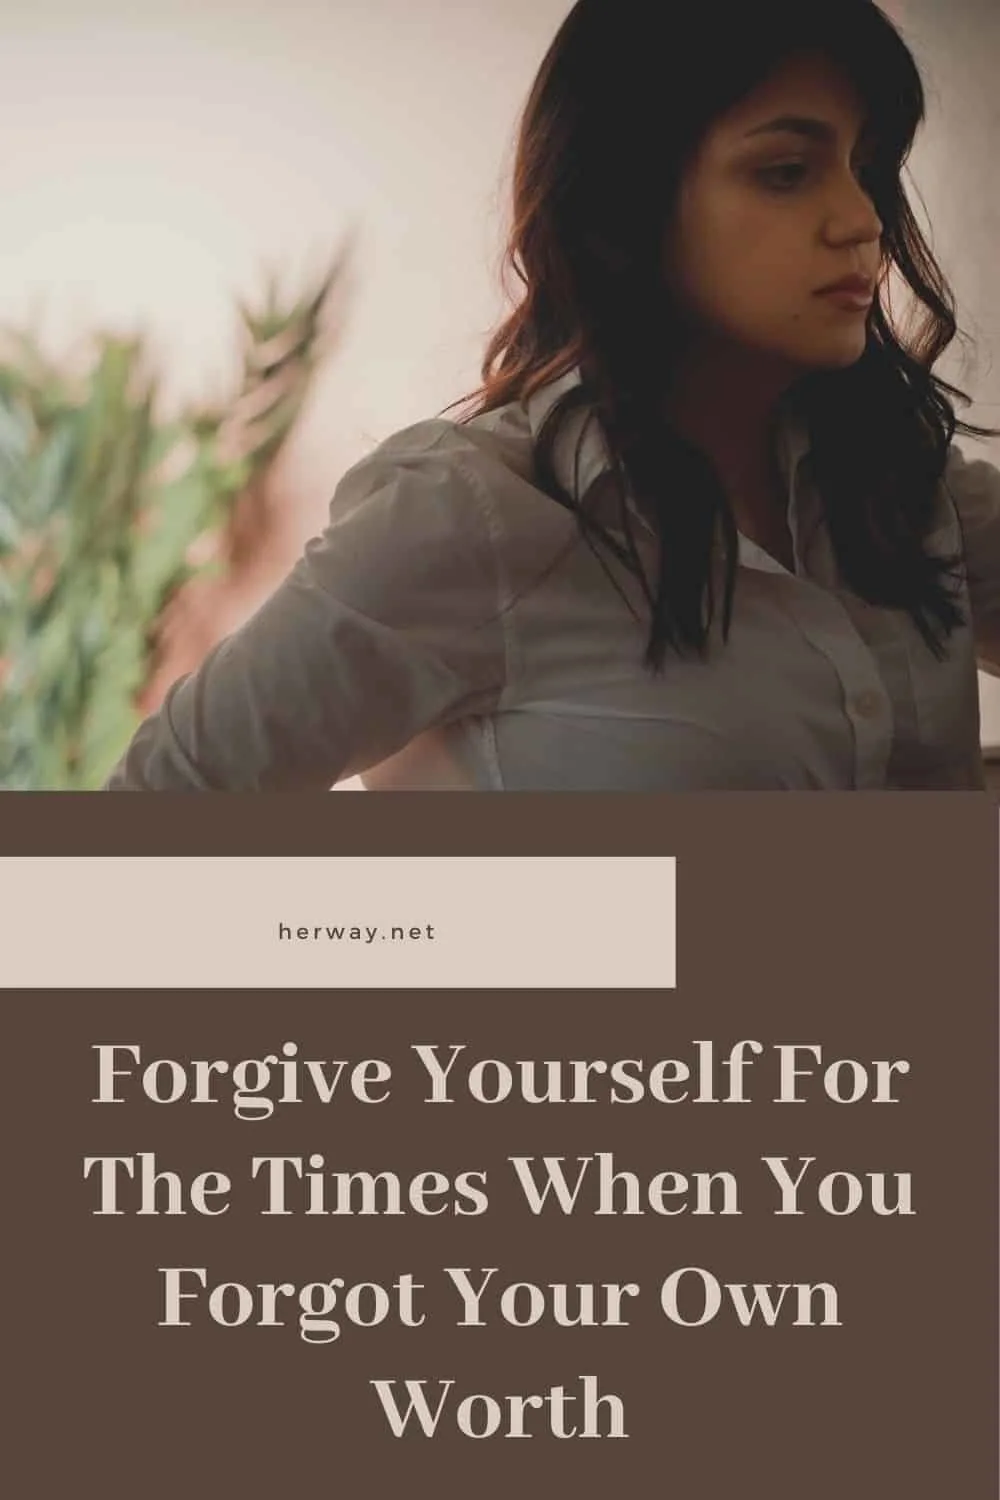 Forgive Yourself For The Times When You Forgot Your Own Worth